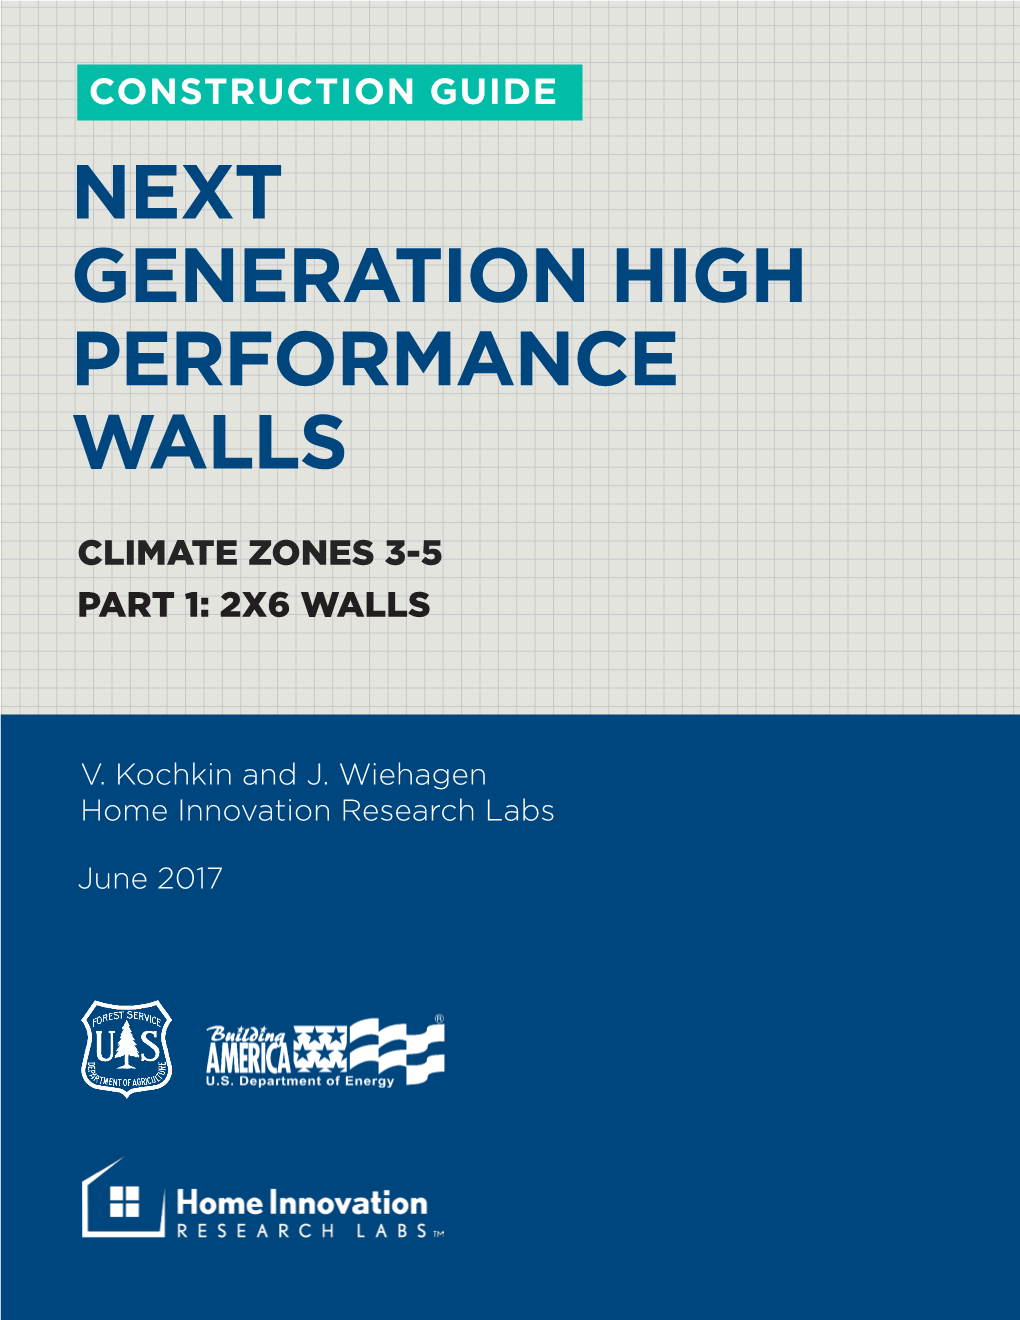 Construction Guide: Next Generation High Performance Walls